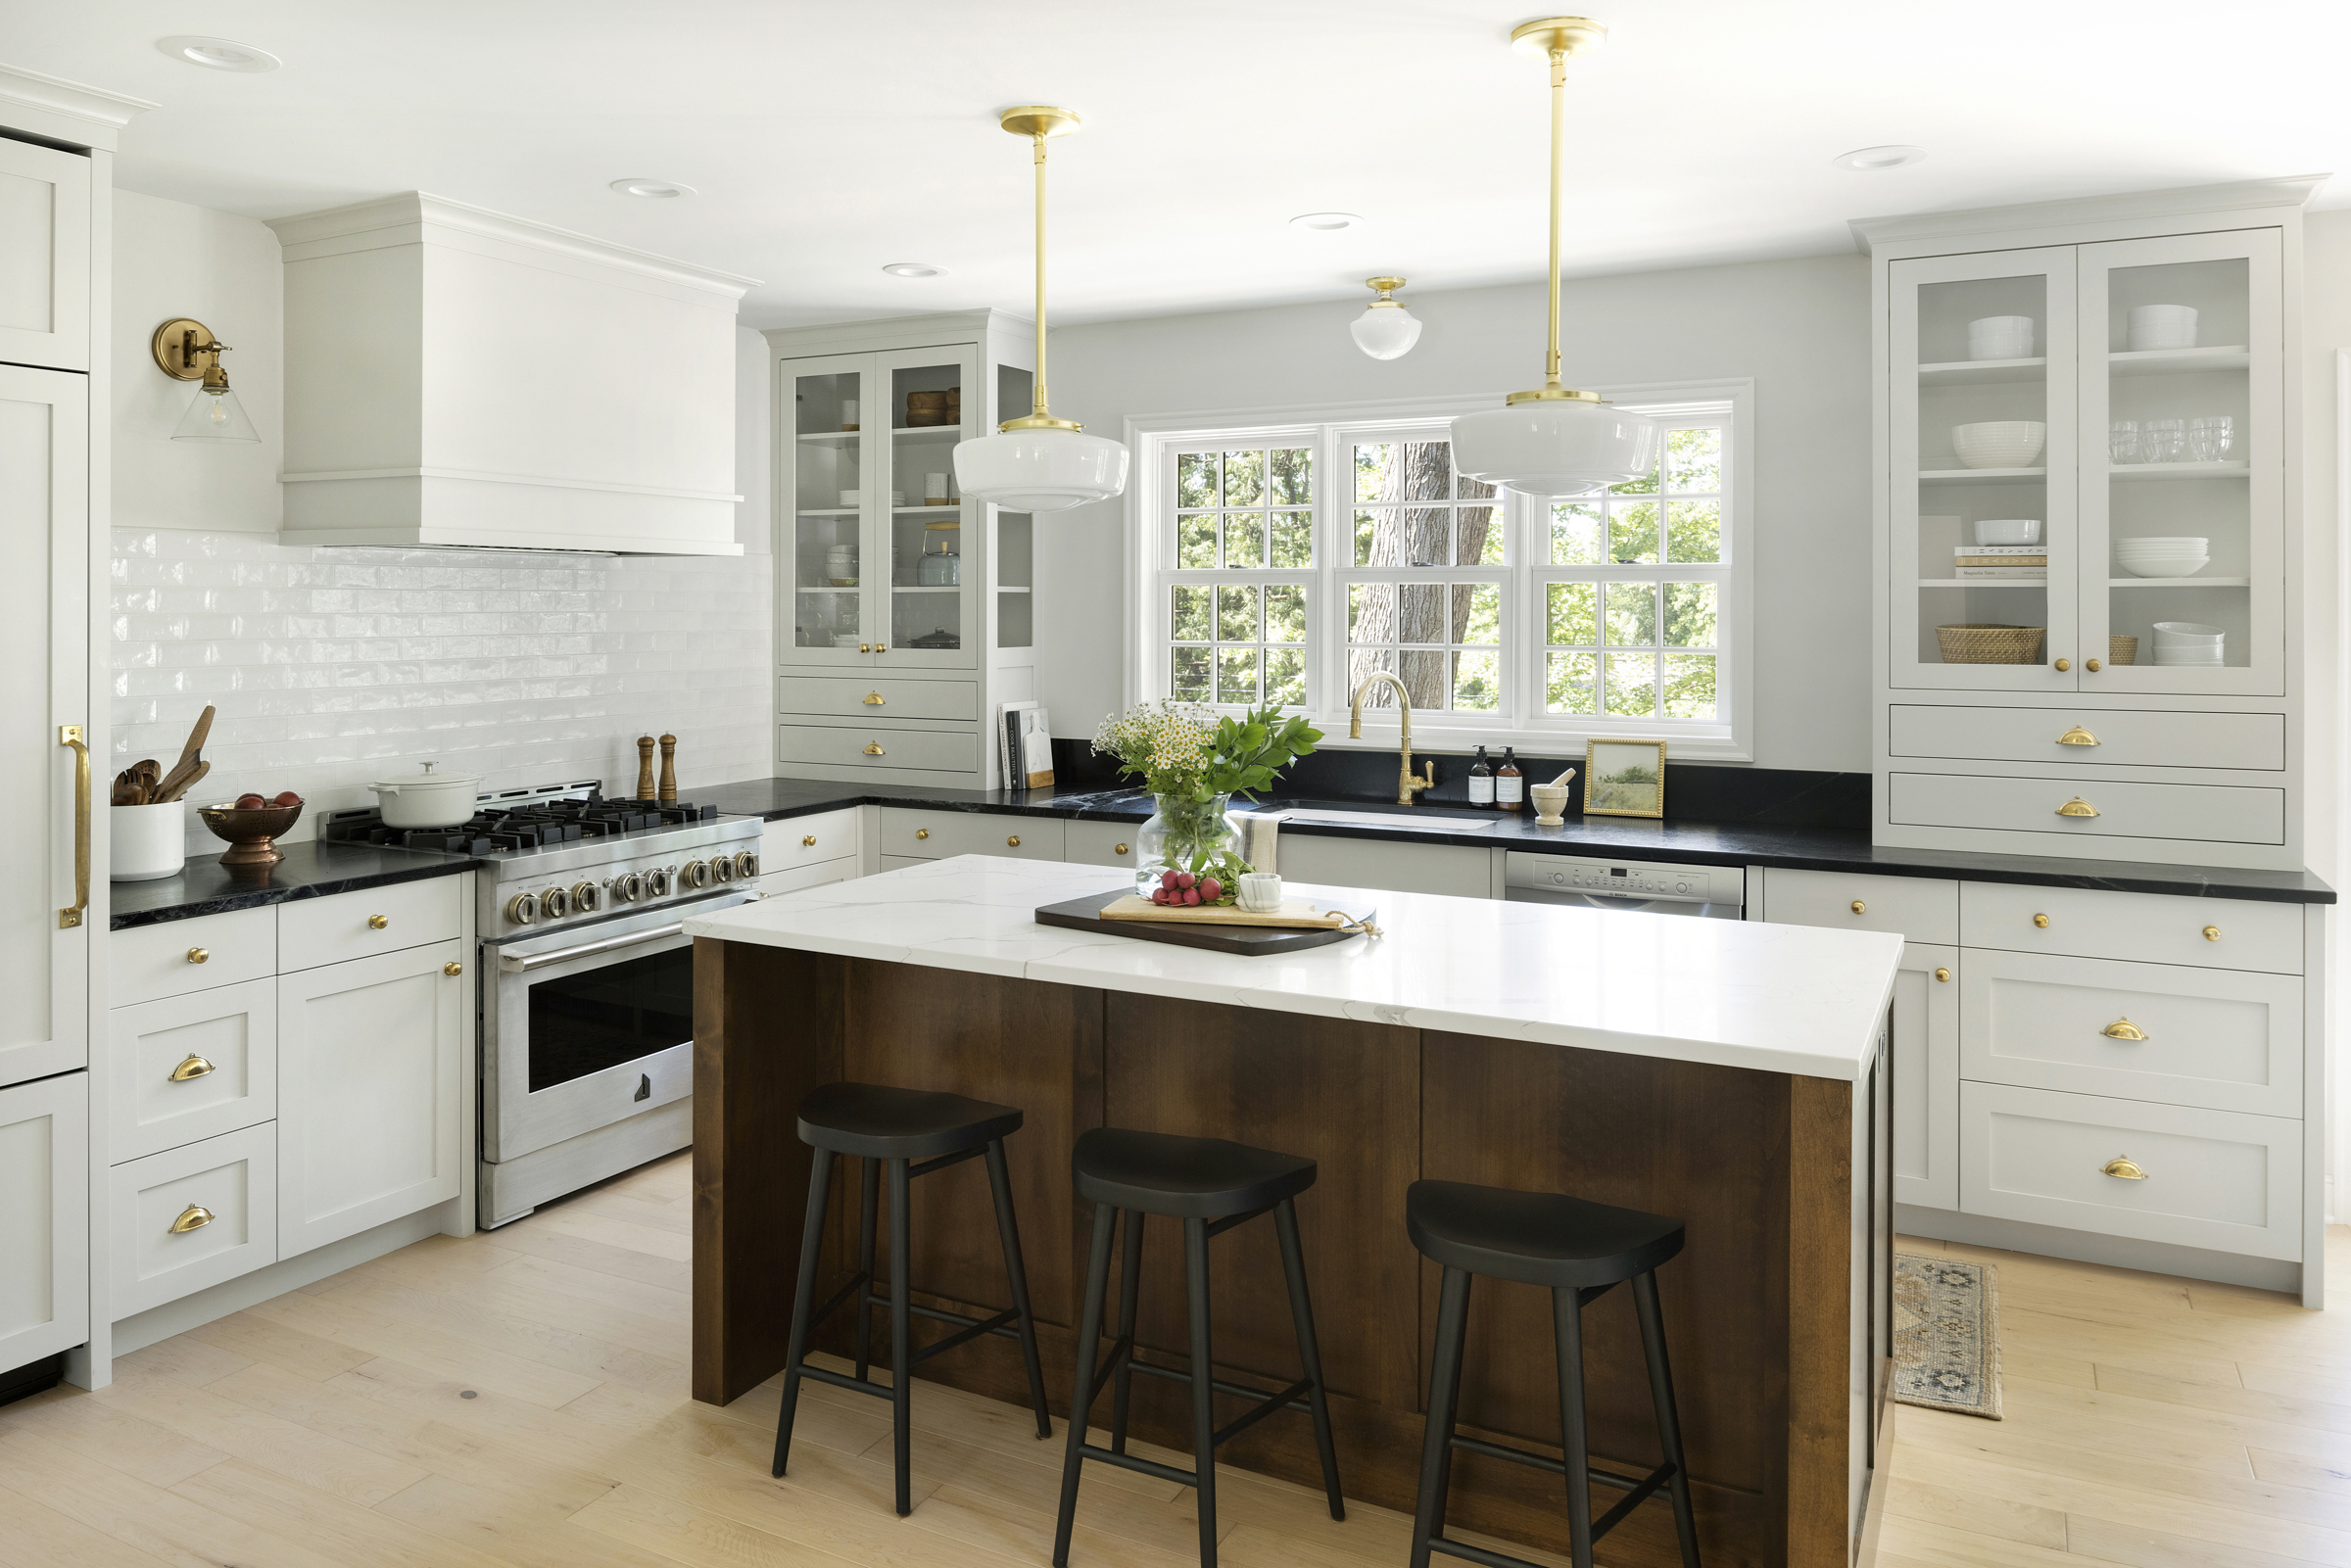 Traditional two tone kitchen with soapstone countertops.